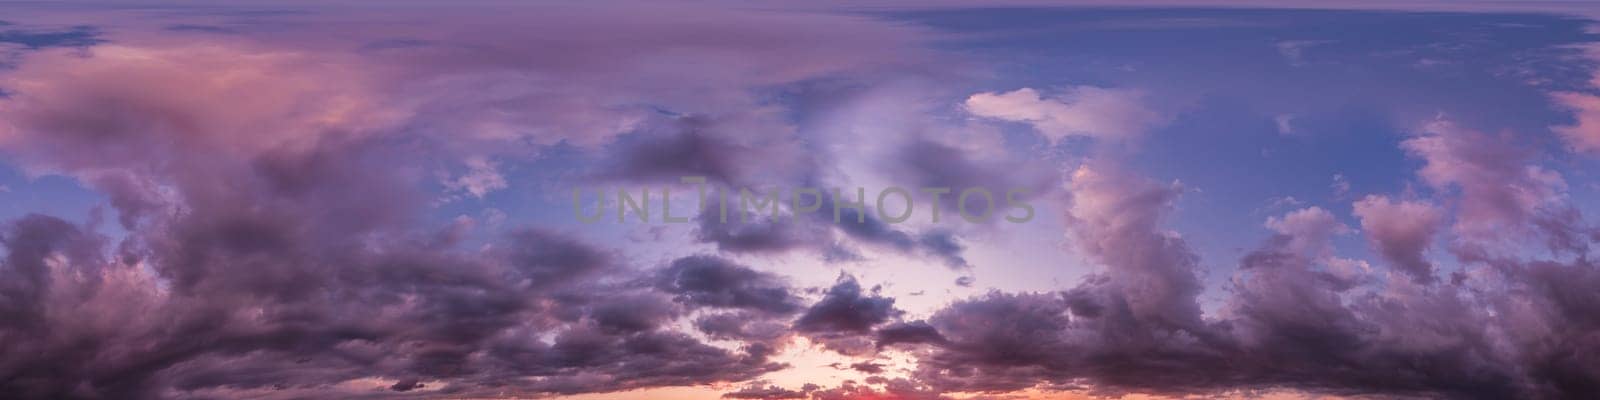 360 panorama of glowing sunset sky with bright pink Cumulus clouds. HDR 360 seamless spherical panorama. Full zenith or sky dome sky replacement for aerial drone panoramas. Climate and weather change. by Matiunina